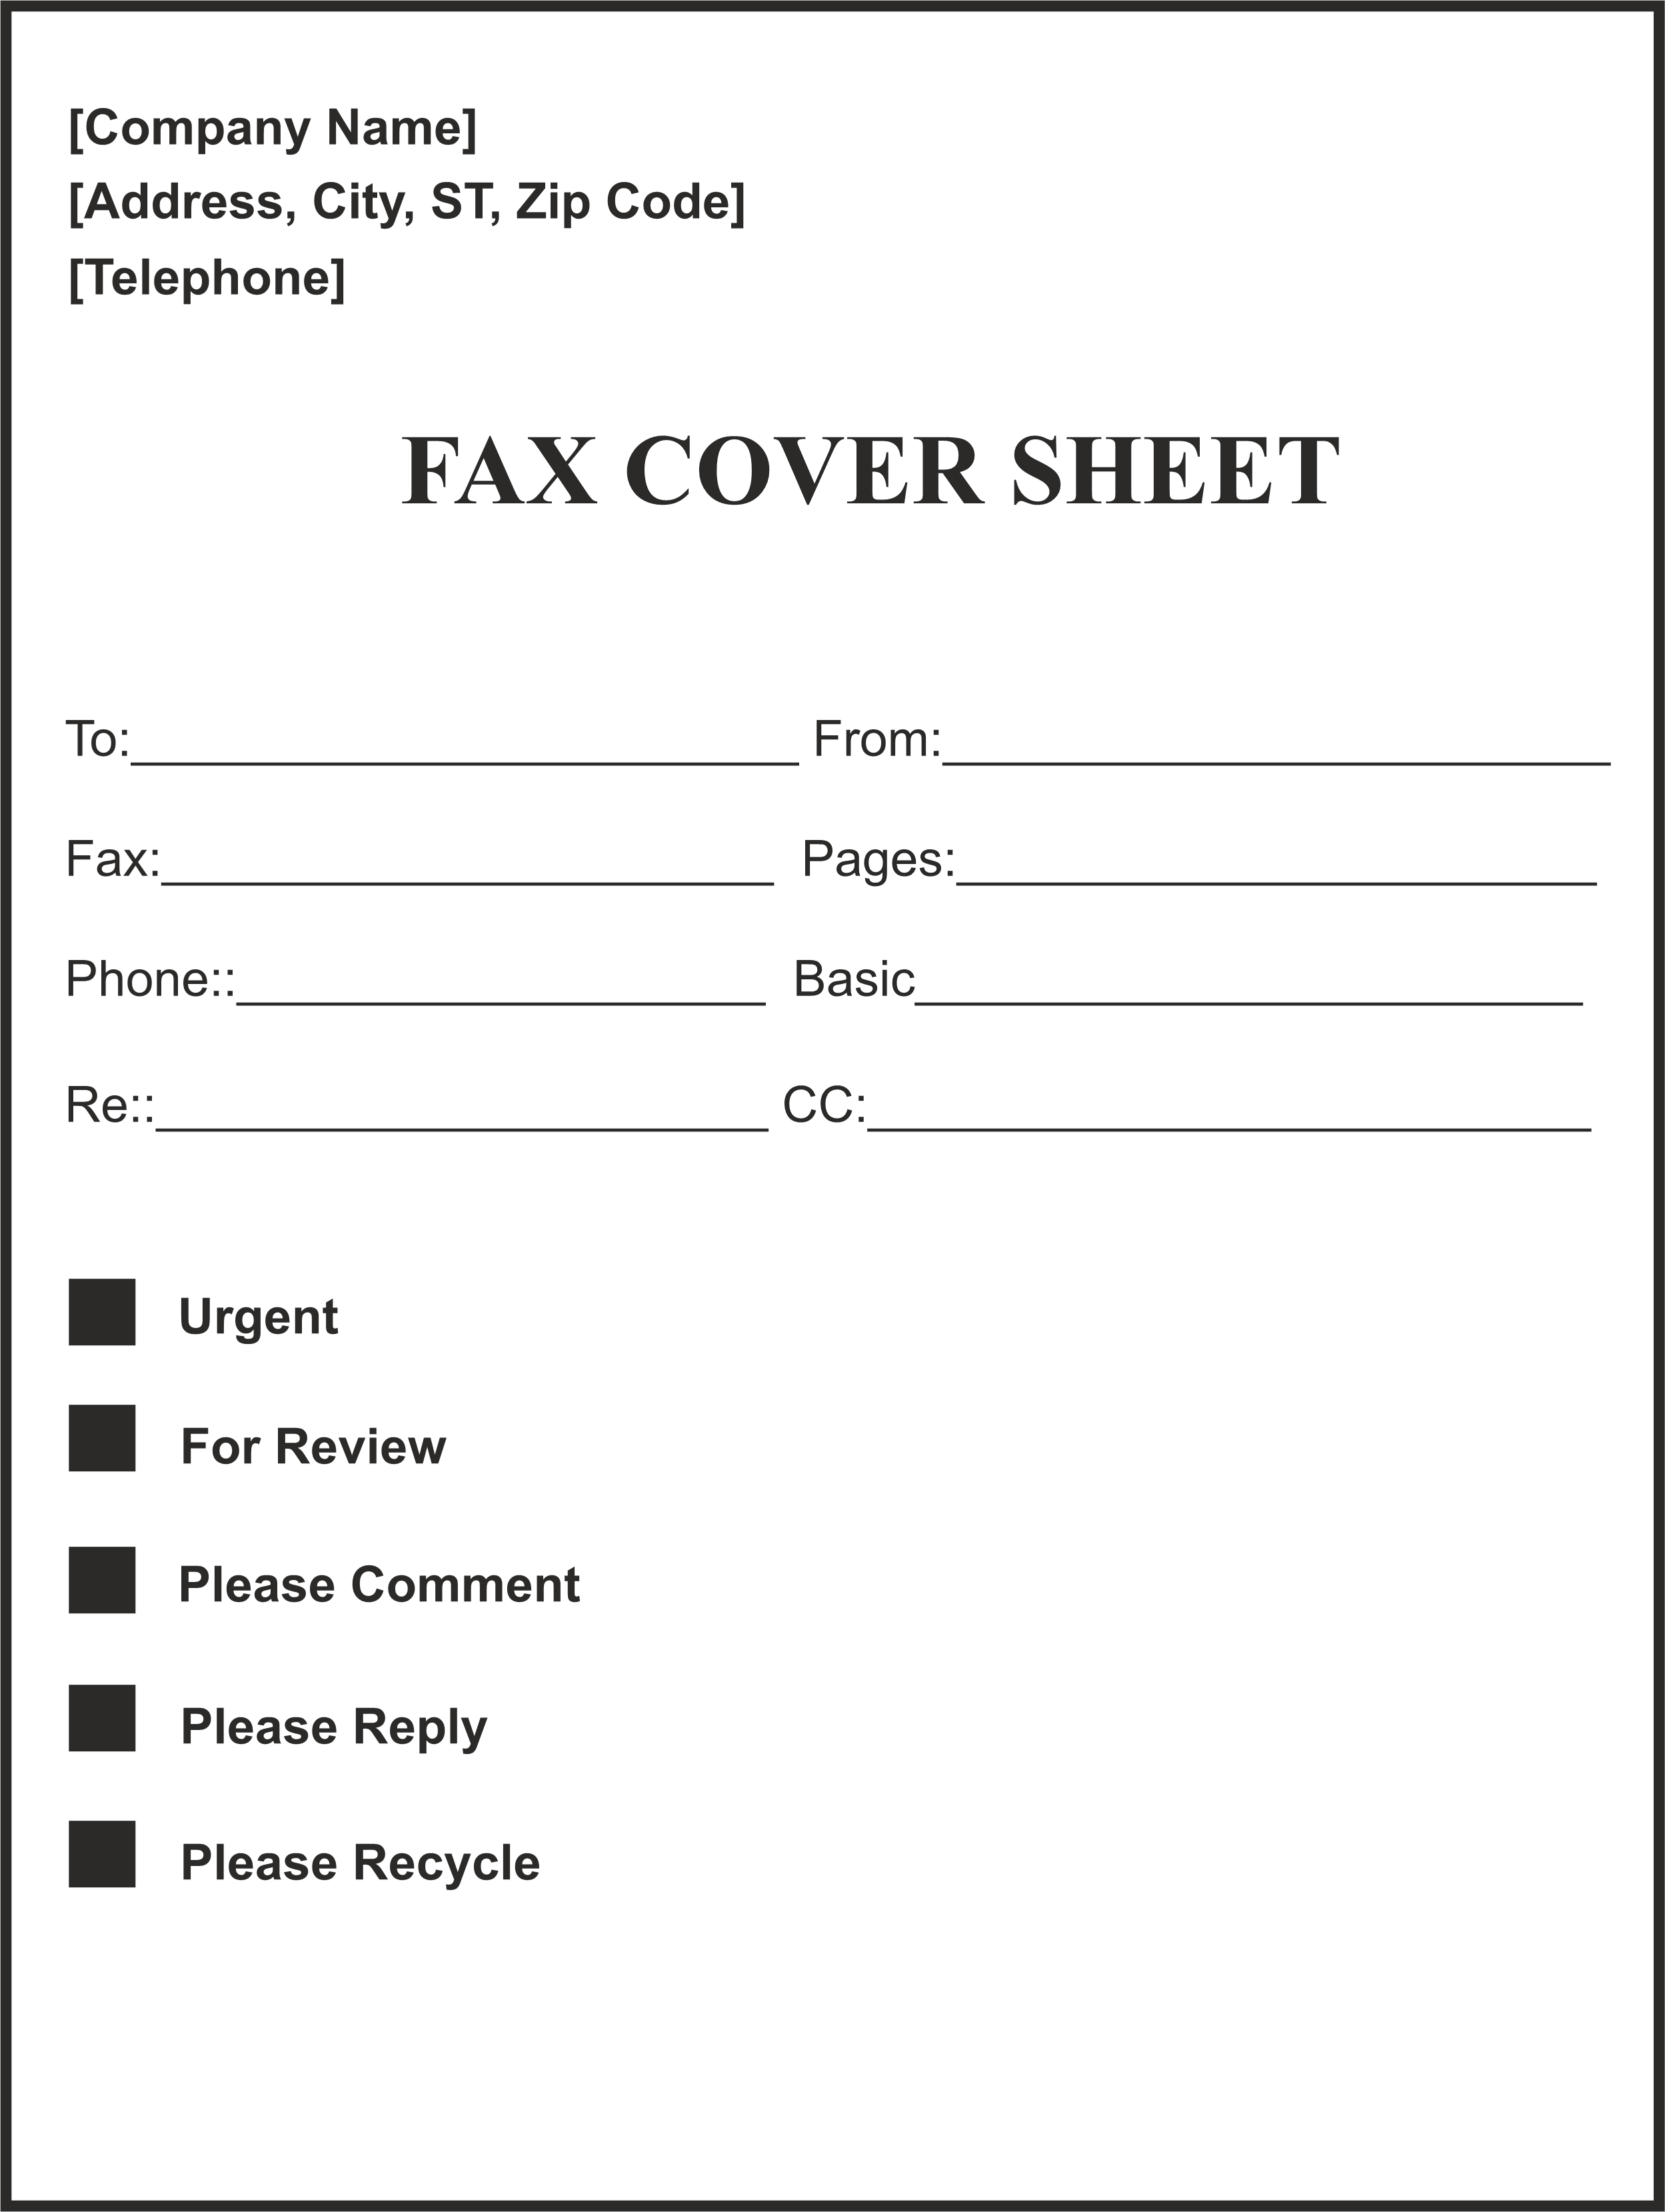 fax cover sheet attention